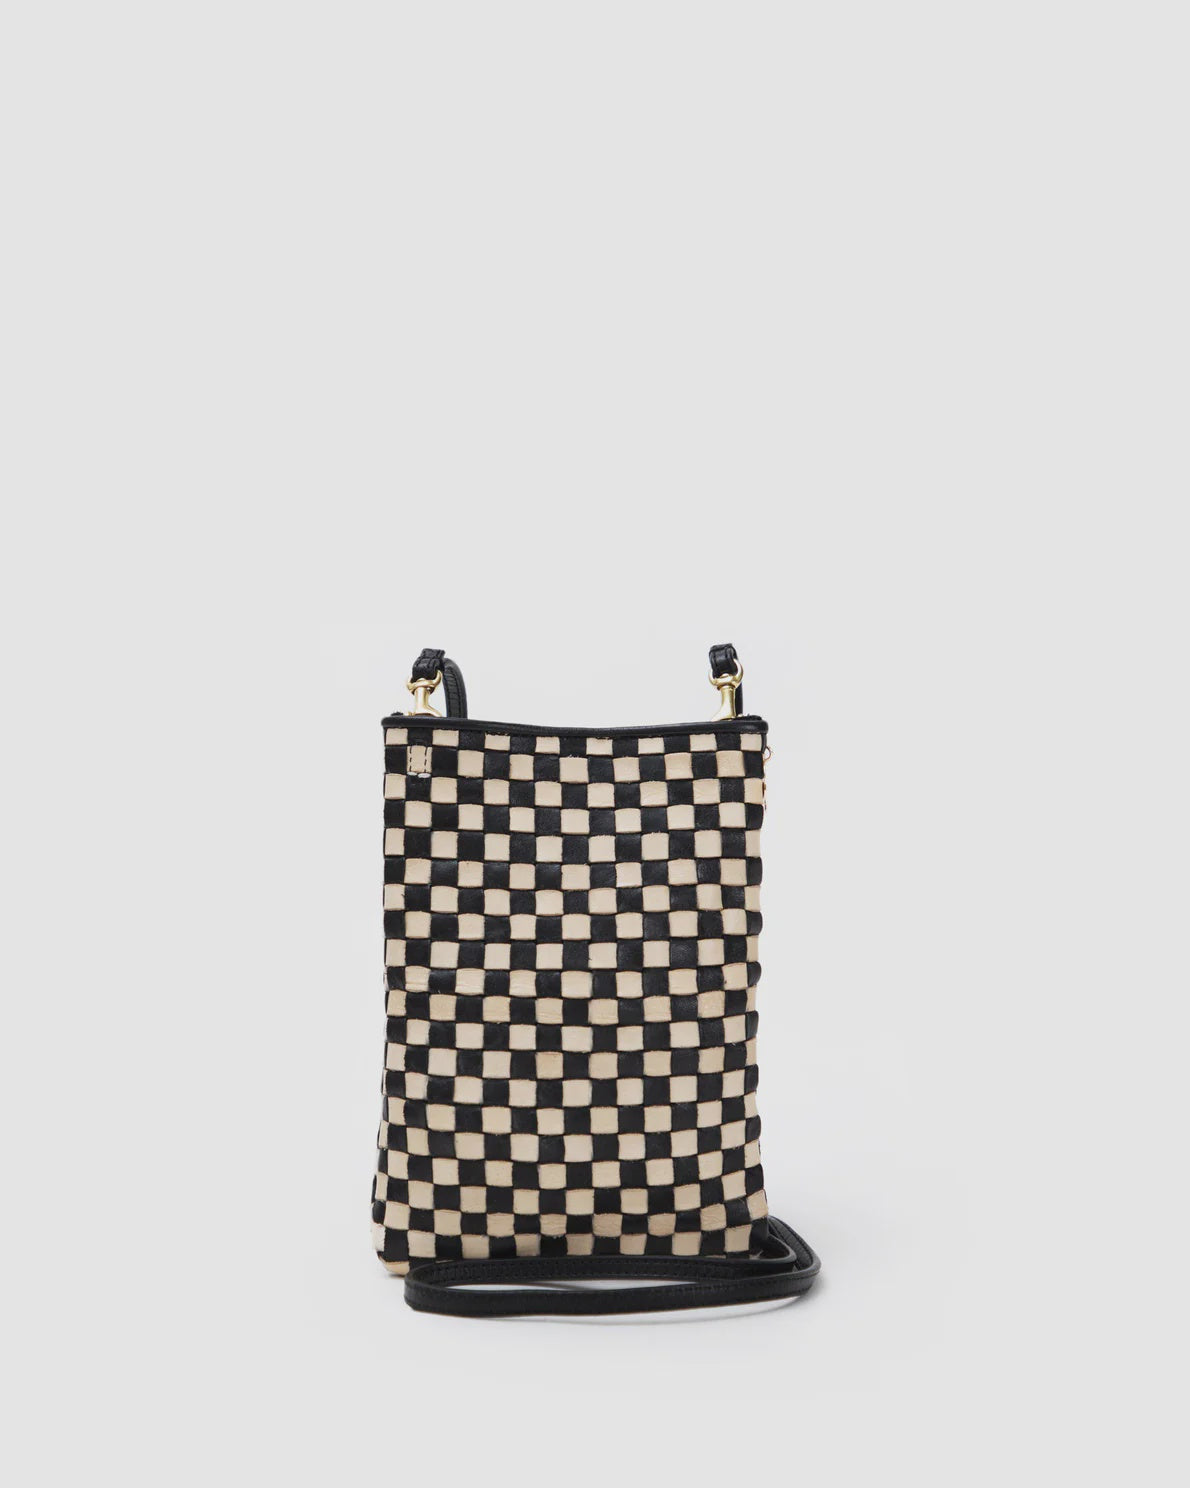 A small, rectangular shoulder bag with a black and beige checkered pattern on the front. It features a black crossbody strap attached at the top corners and a black trim around the edges. The background is plain white. This is the Poche by Clare Vivier.